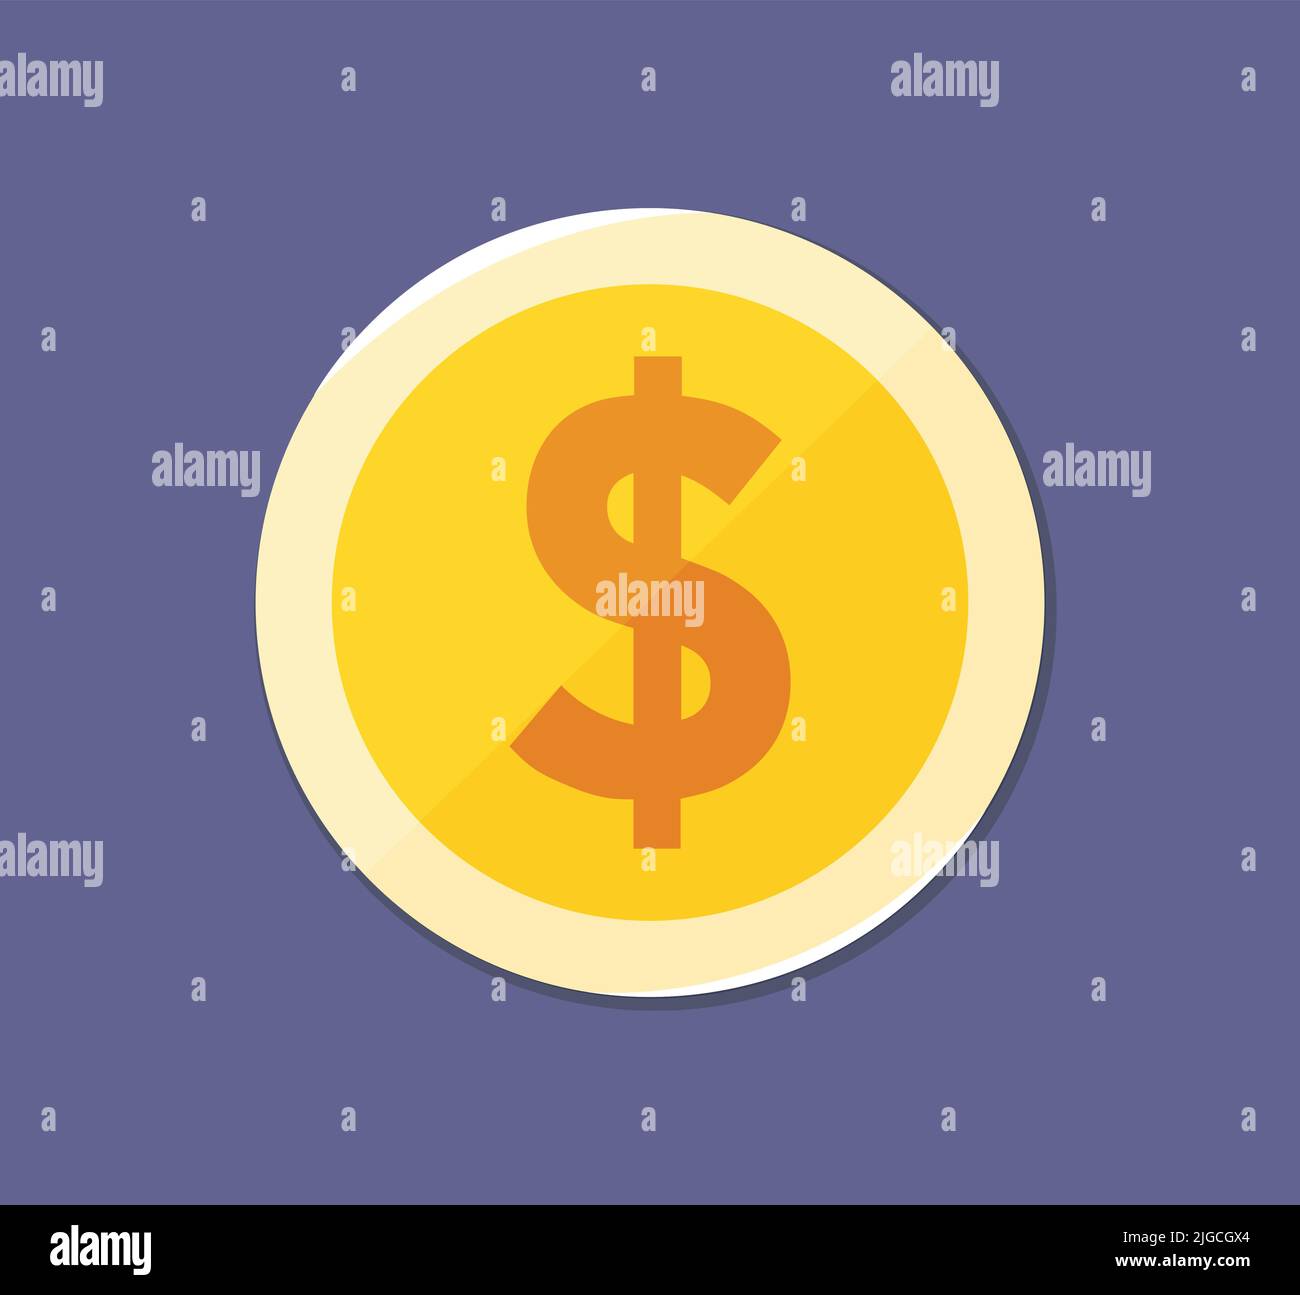 Gold Dollar Coin Penny Cartoon Illustration Money Currency Isolated Business Icon Stock Vector